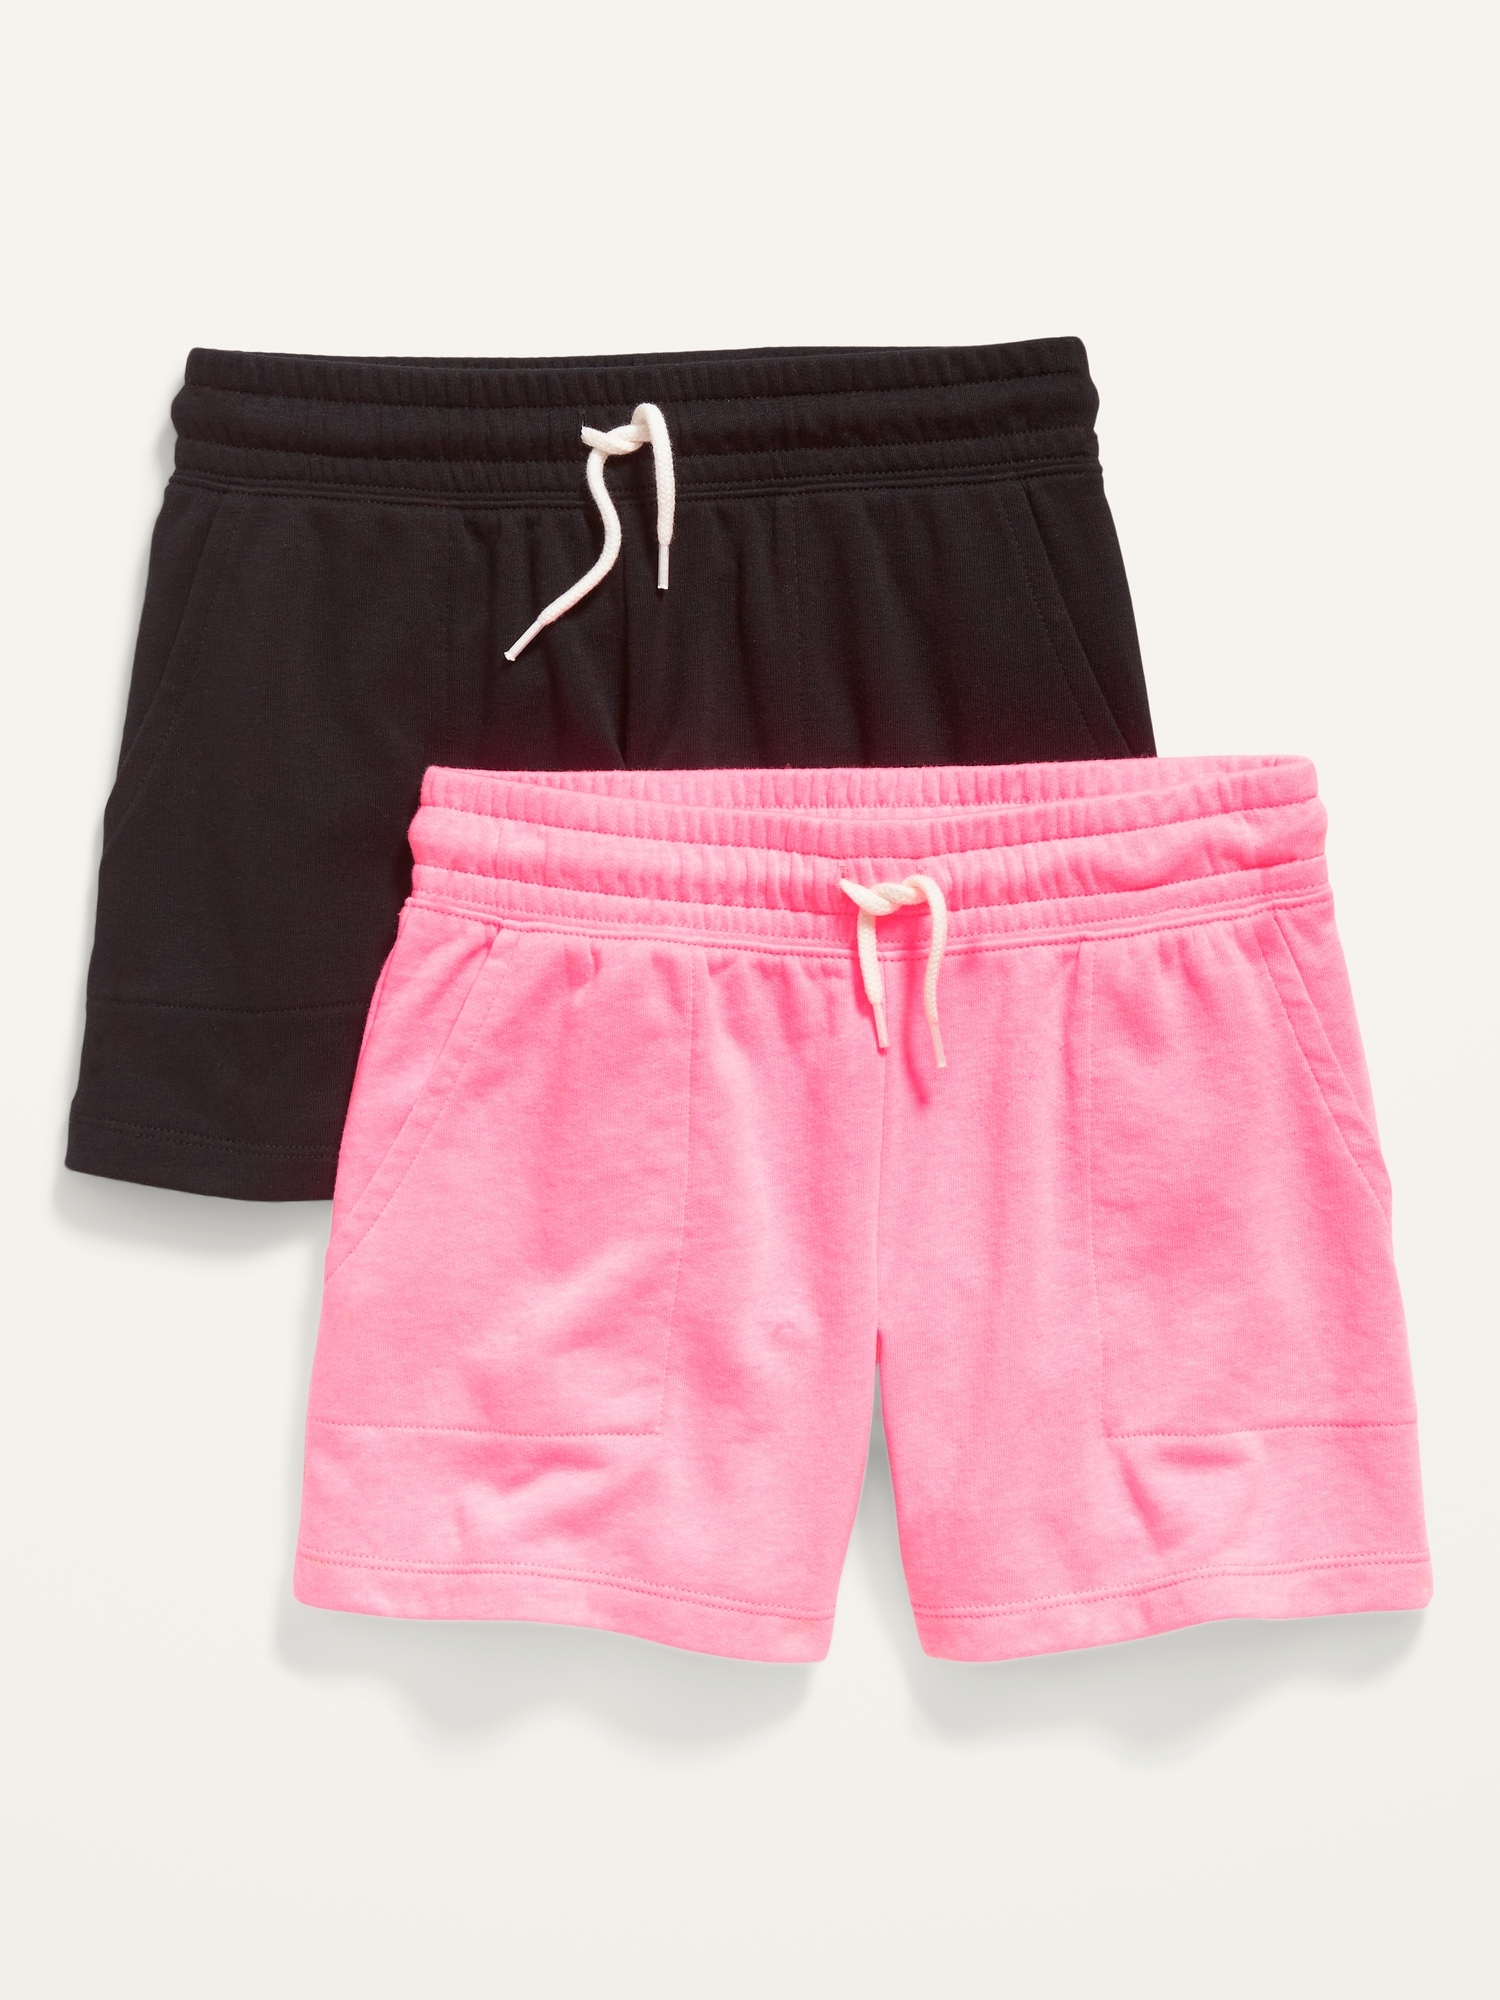 Old Navy Vintage French Terry Drawstring Utility Shorts 2-Pack for Girls pink. 1